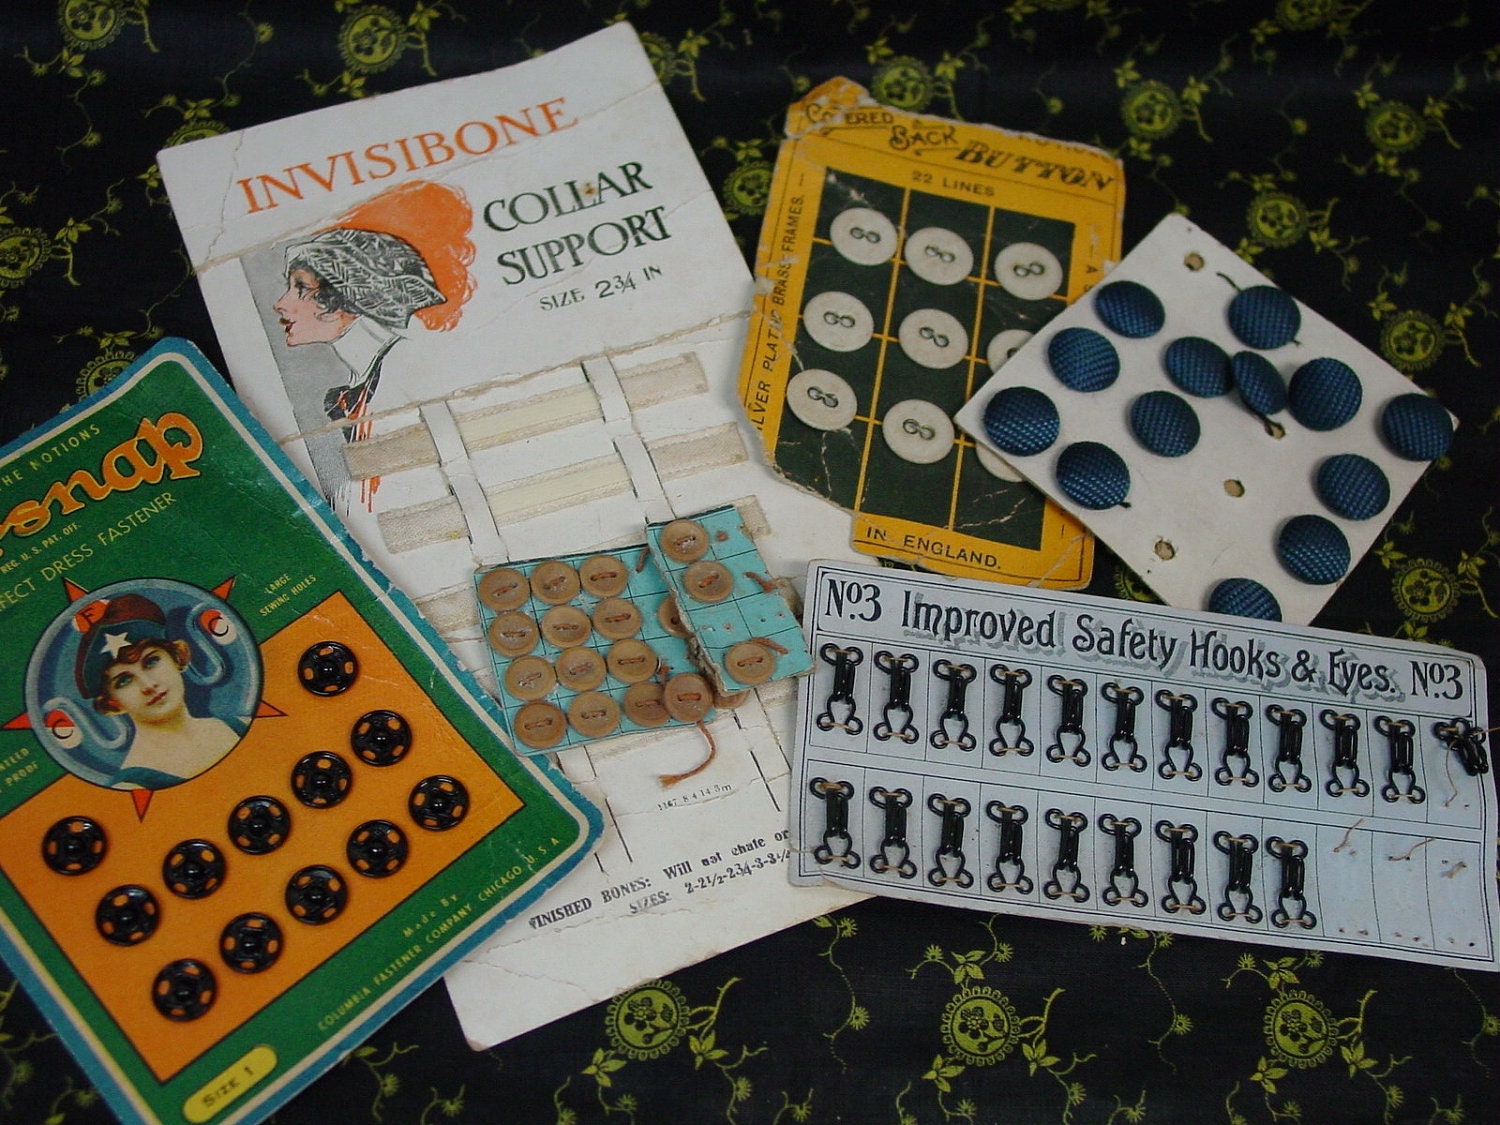 Lot of Old Sewing Notions, Snaps,Buttons,Celluloid Stays, Fun Stuff - auntnonniesnest